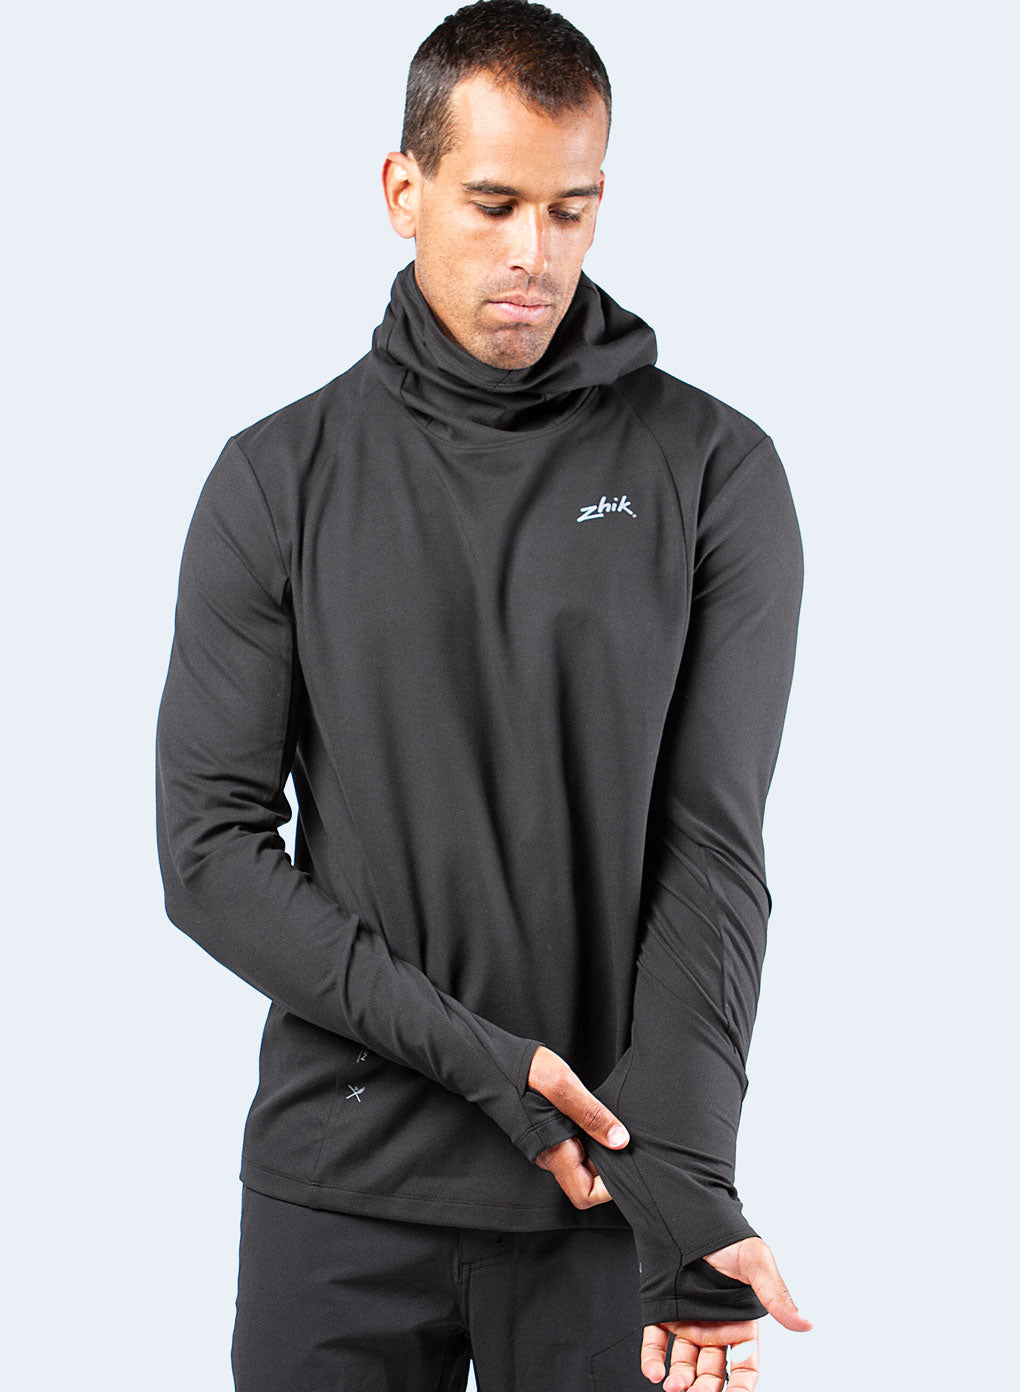 Mens Black ZhikMotion Hooded Top